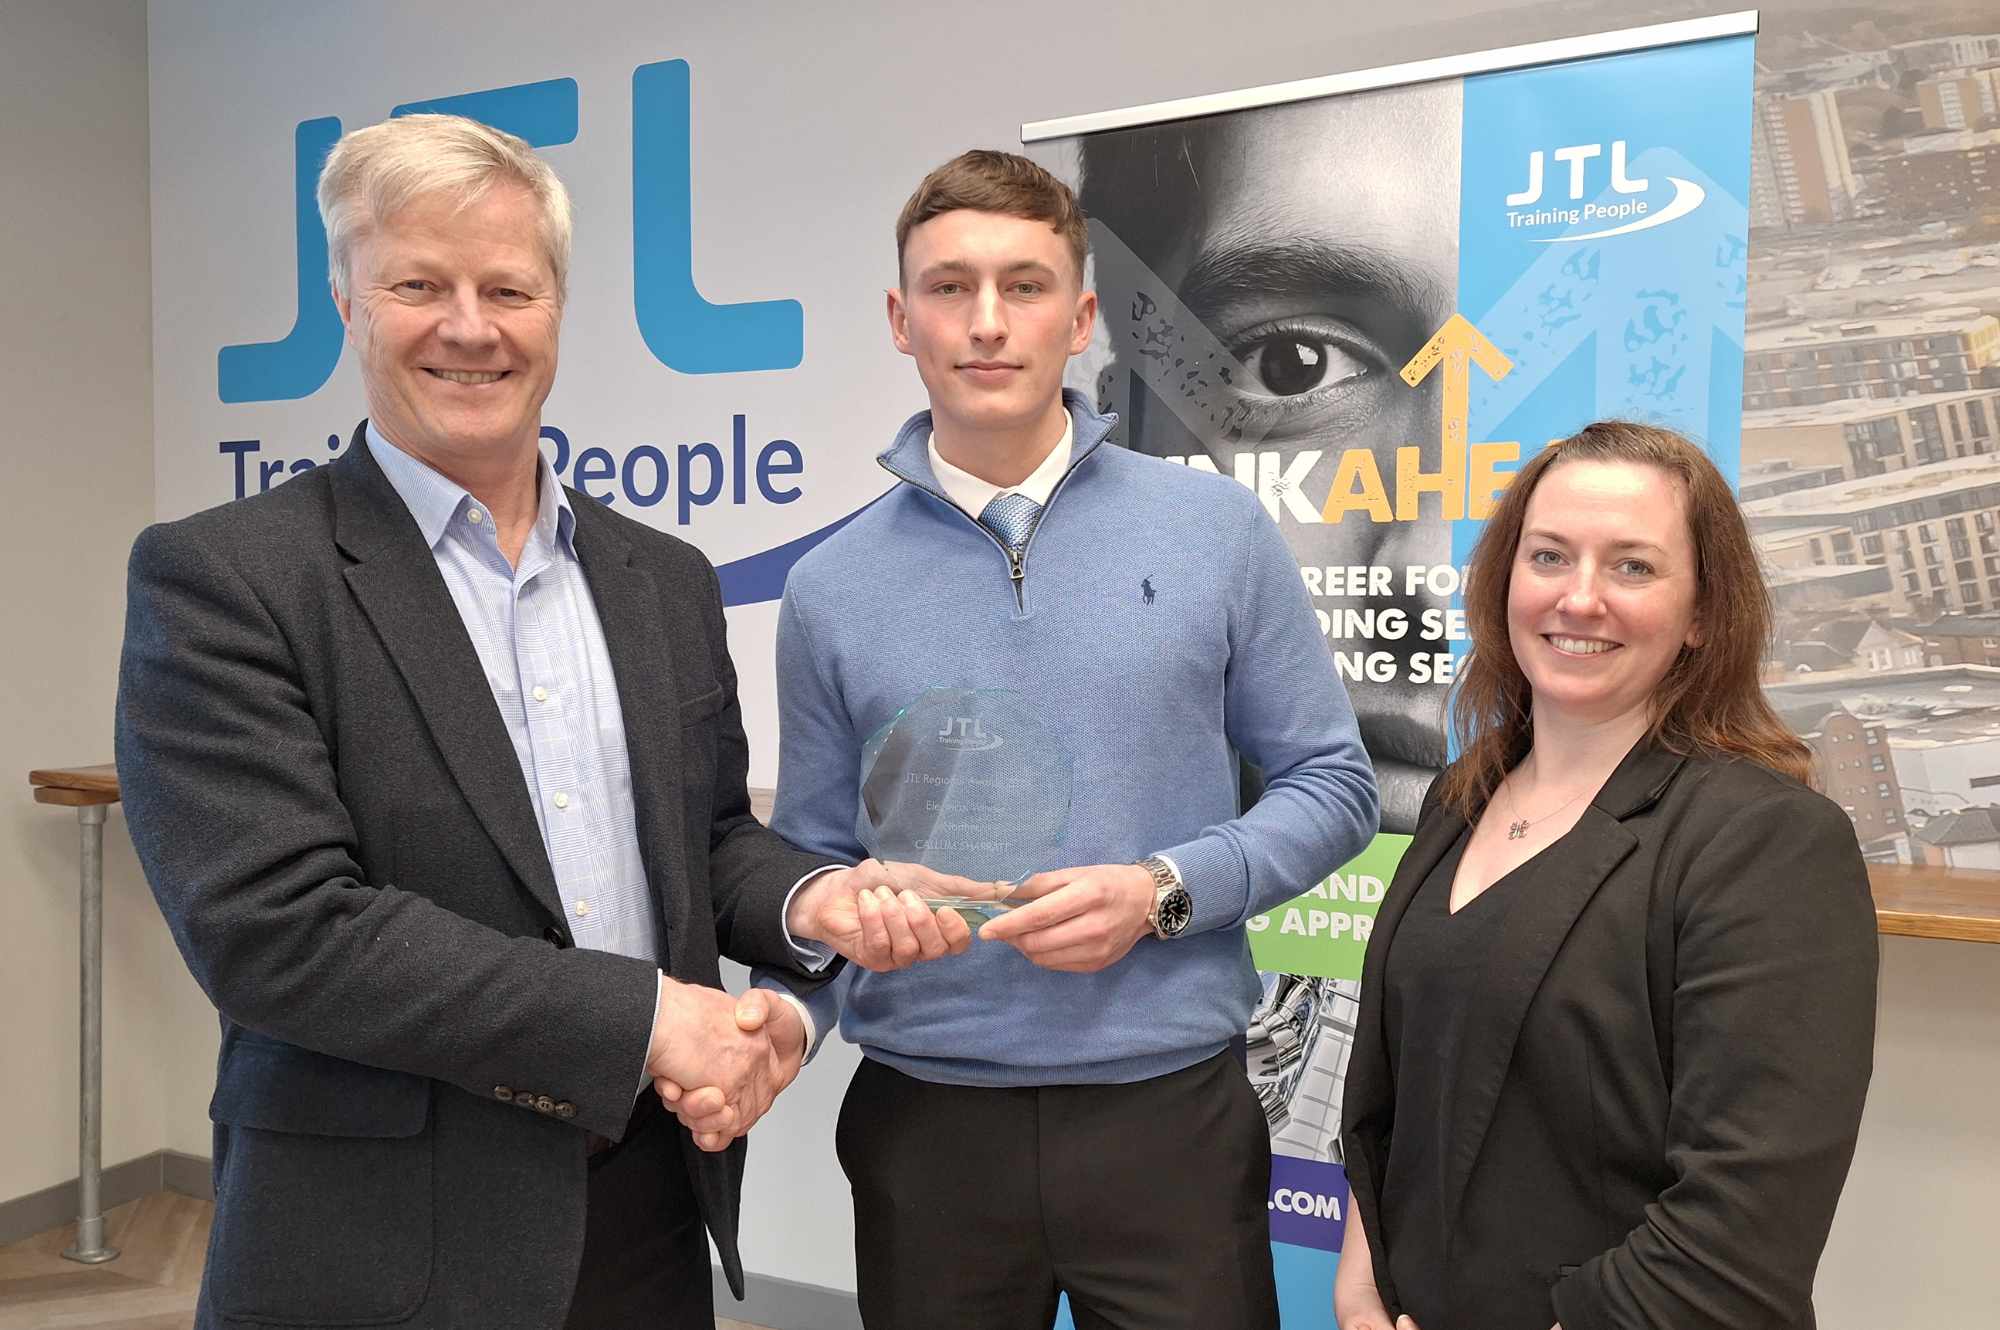 Regional Electrical Award Winner Callum Sharratt from Blackpool being presented with his trophy by Chris Claydon and Clair Bradley of JTL